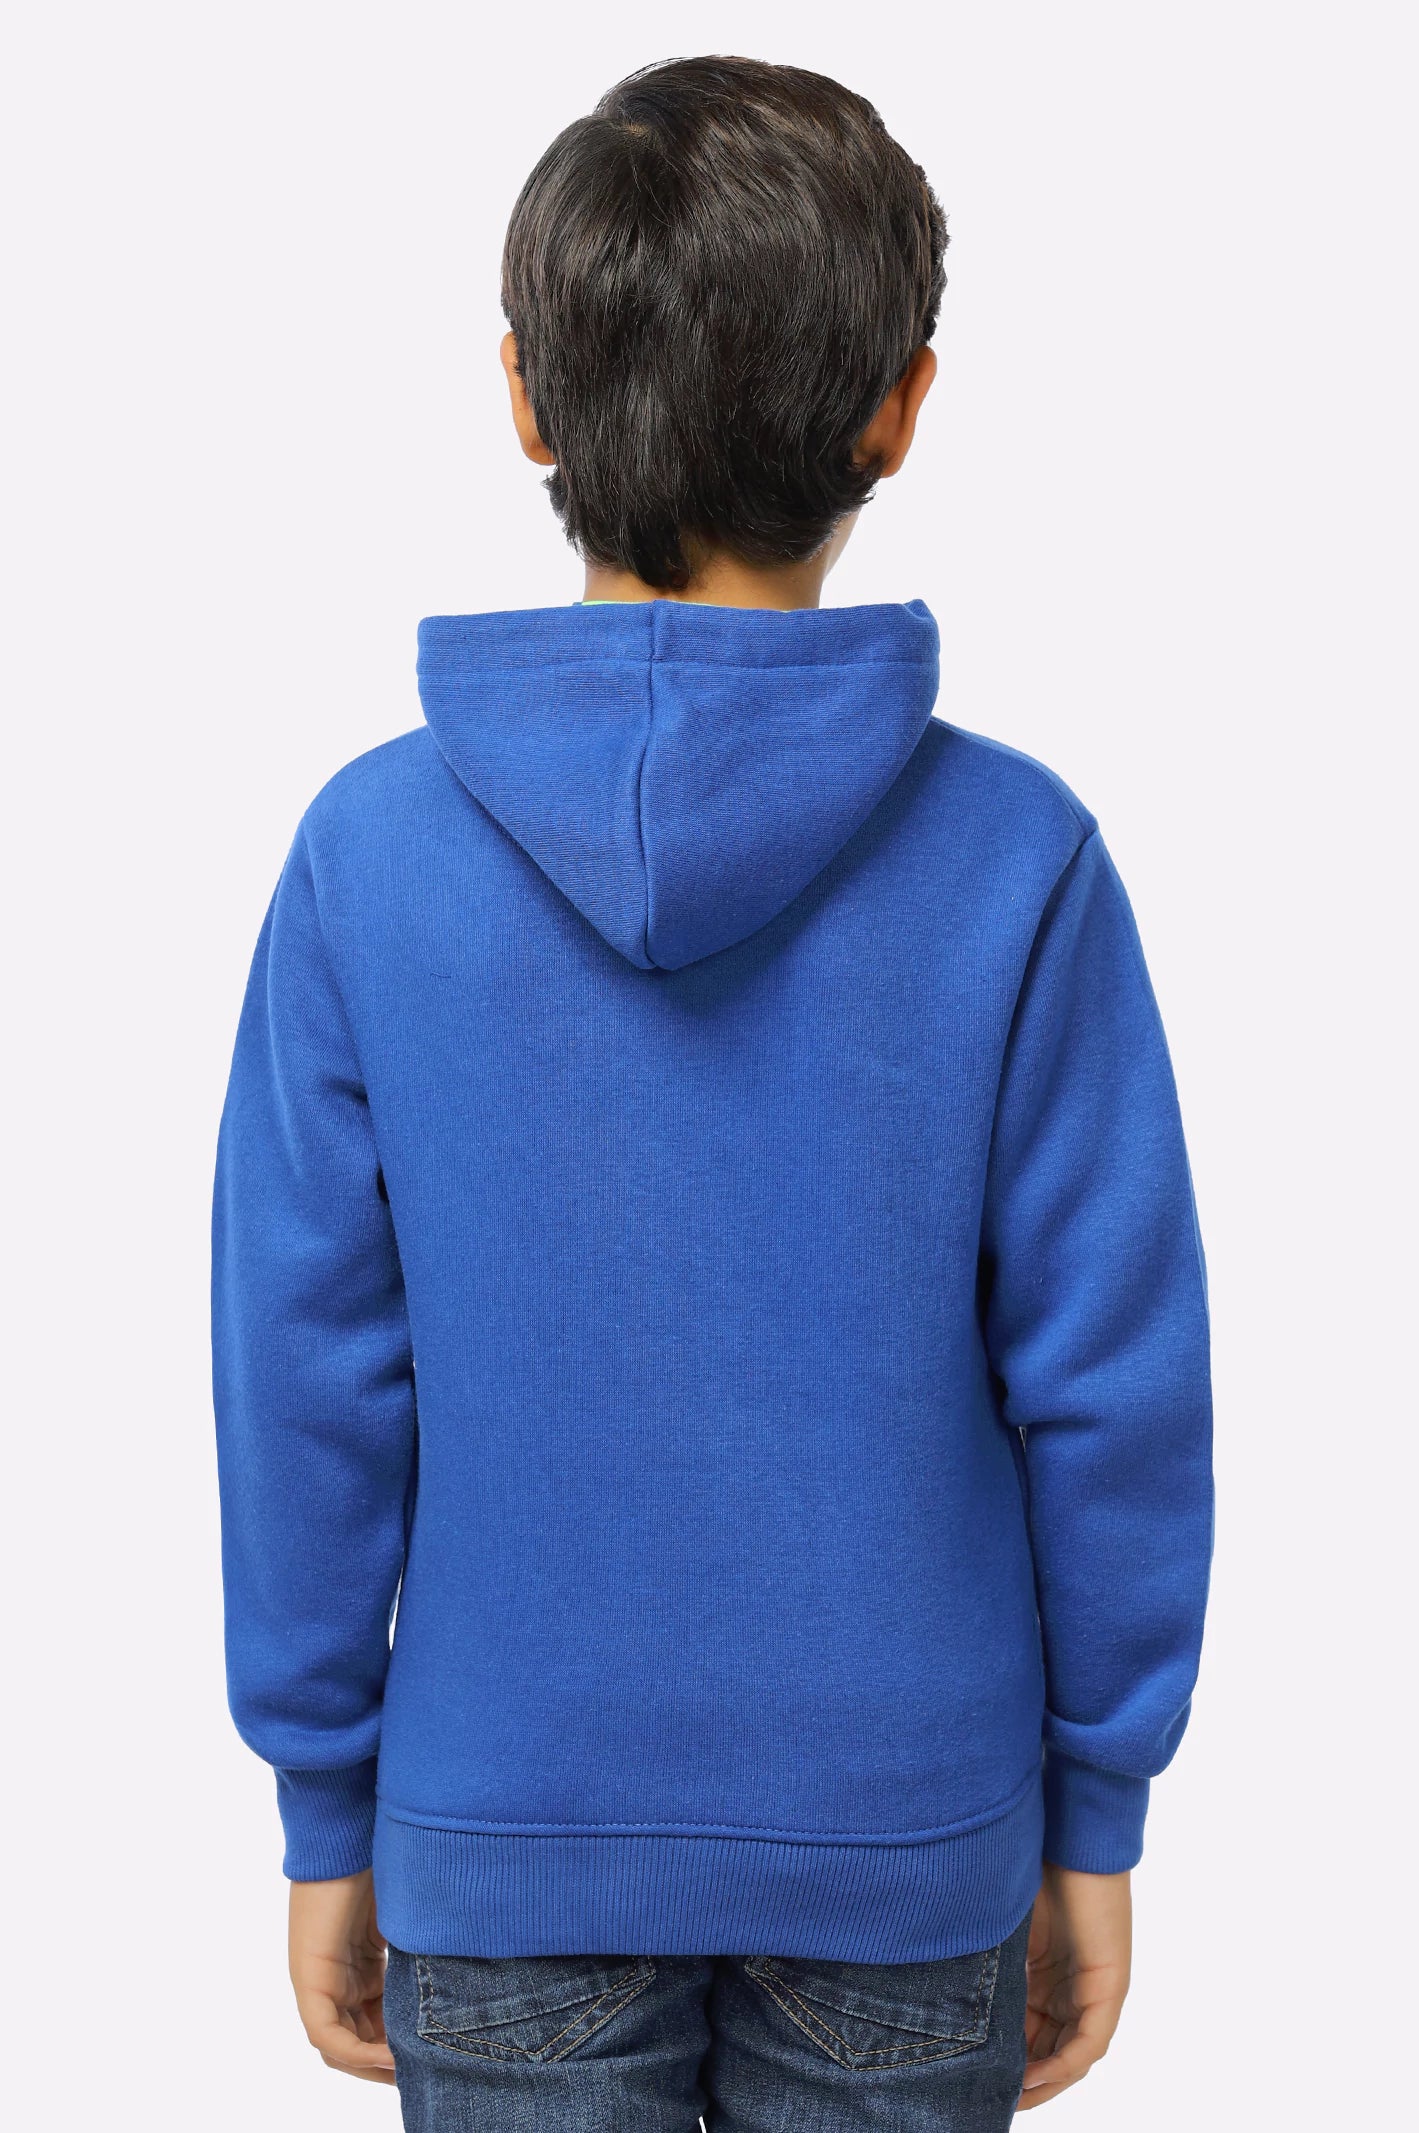 Royal Blue Graphic Printed Boys Hoodie From Diners